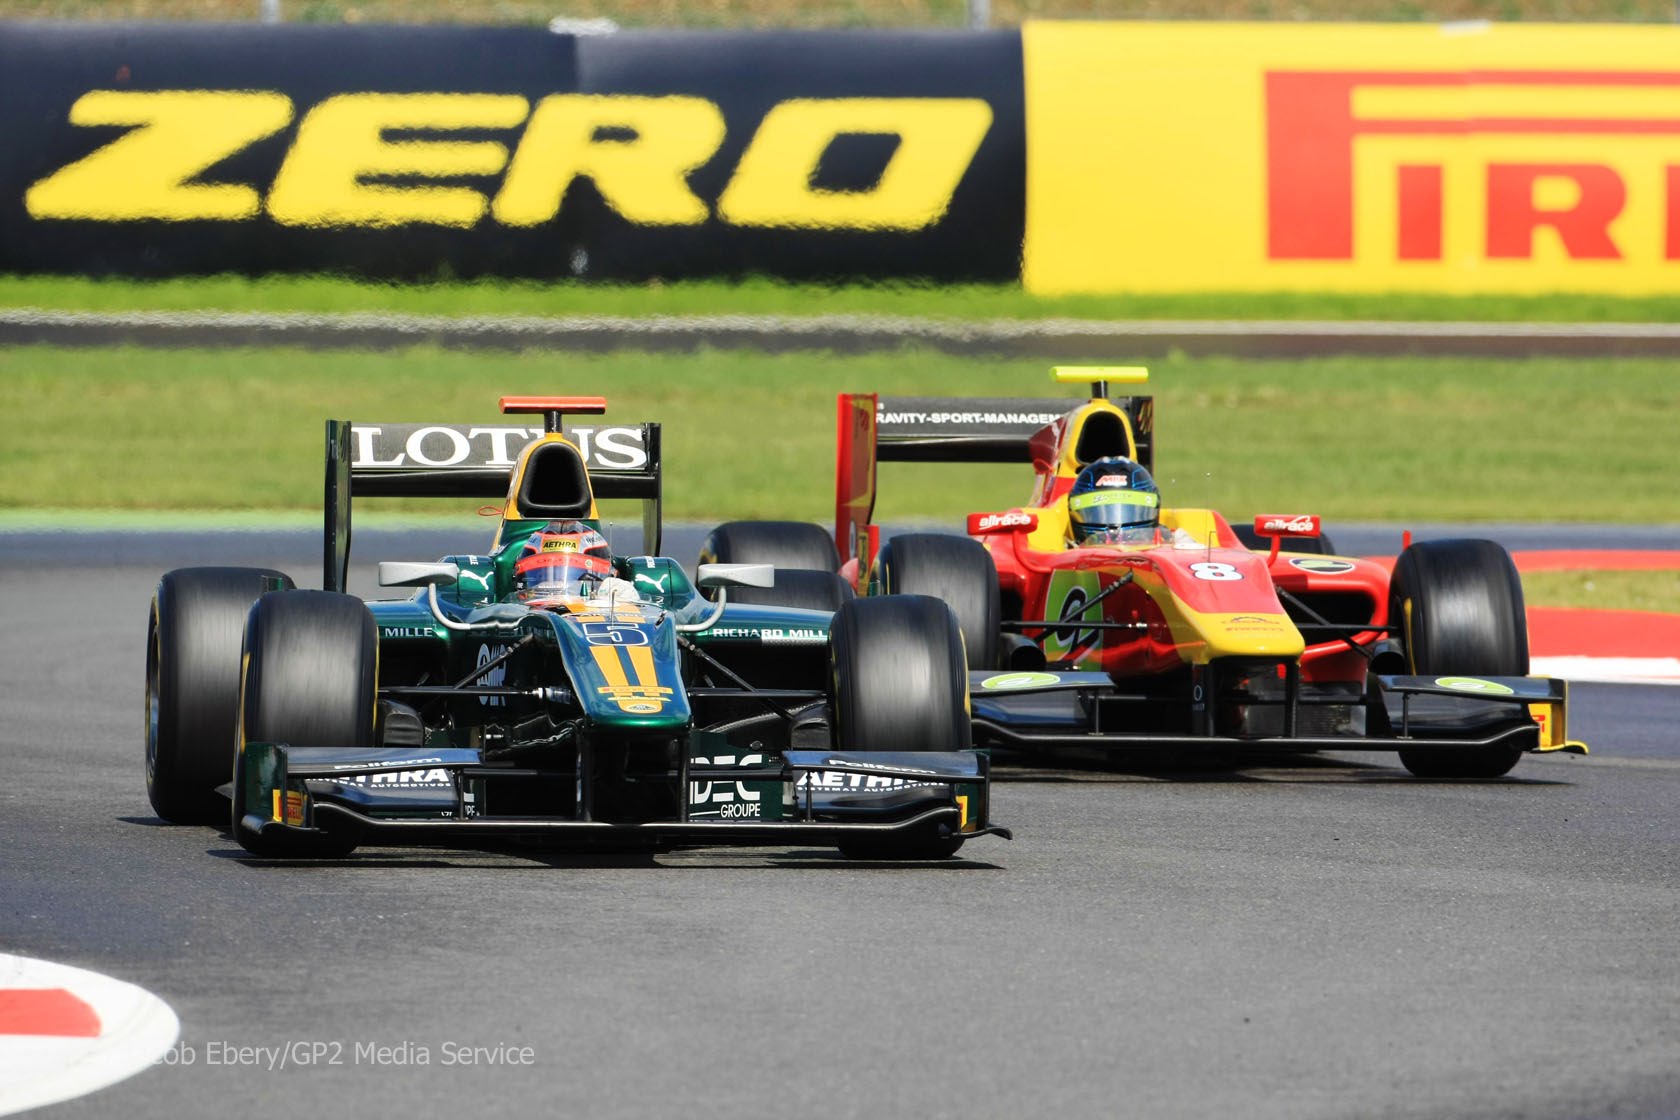 BATTLE OF THE WEEK: Jules Bianchi tussles for Silverstone GP2 win